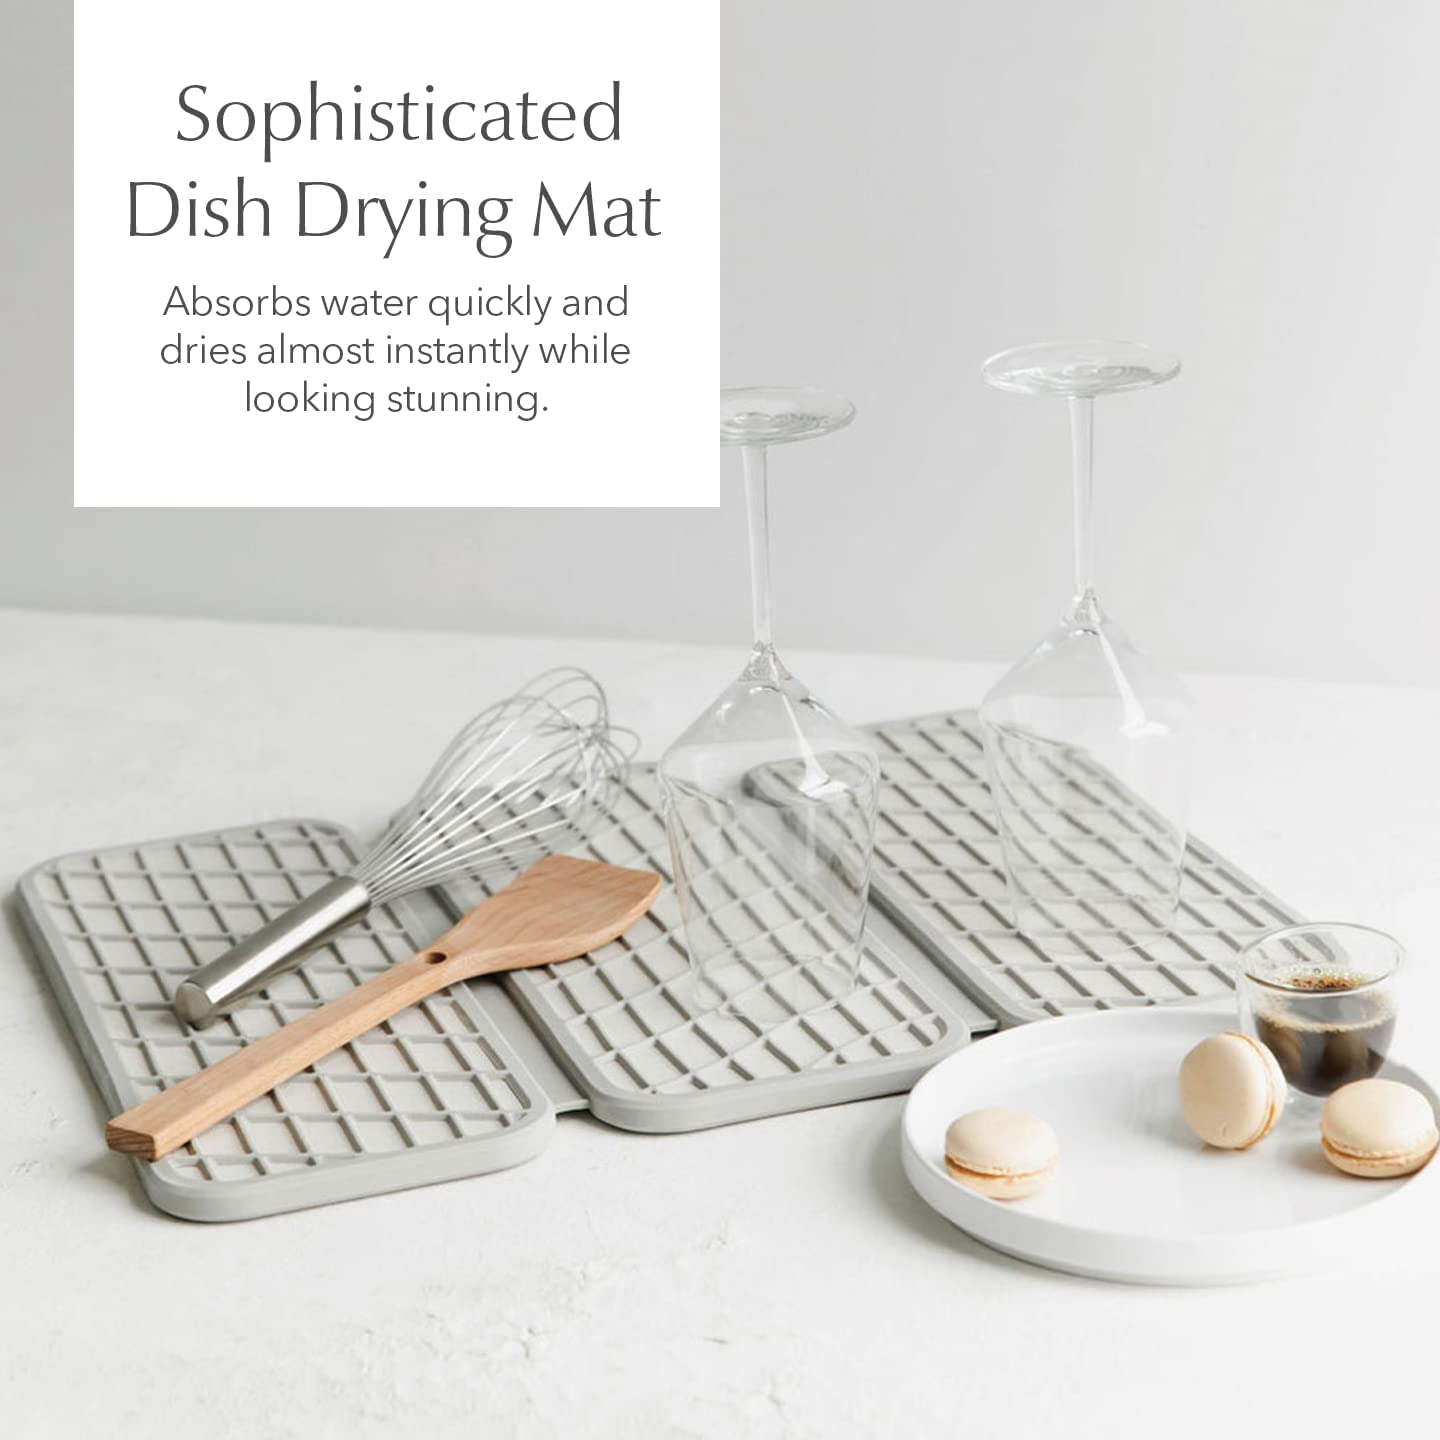 I've Tried Dozens of Dish Drying Mats, and This Is the Only One